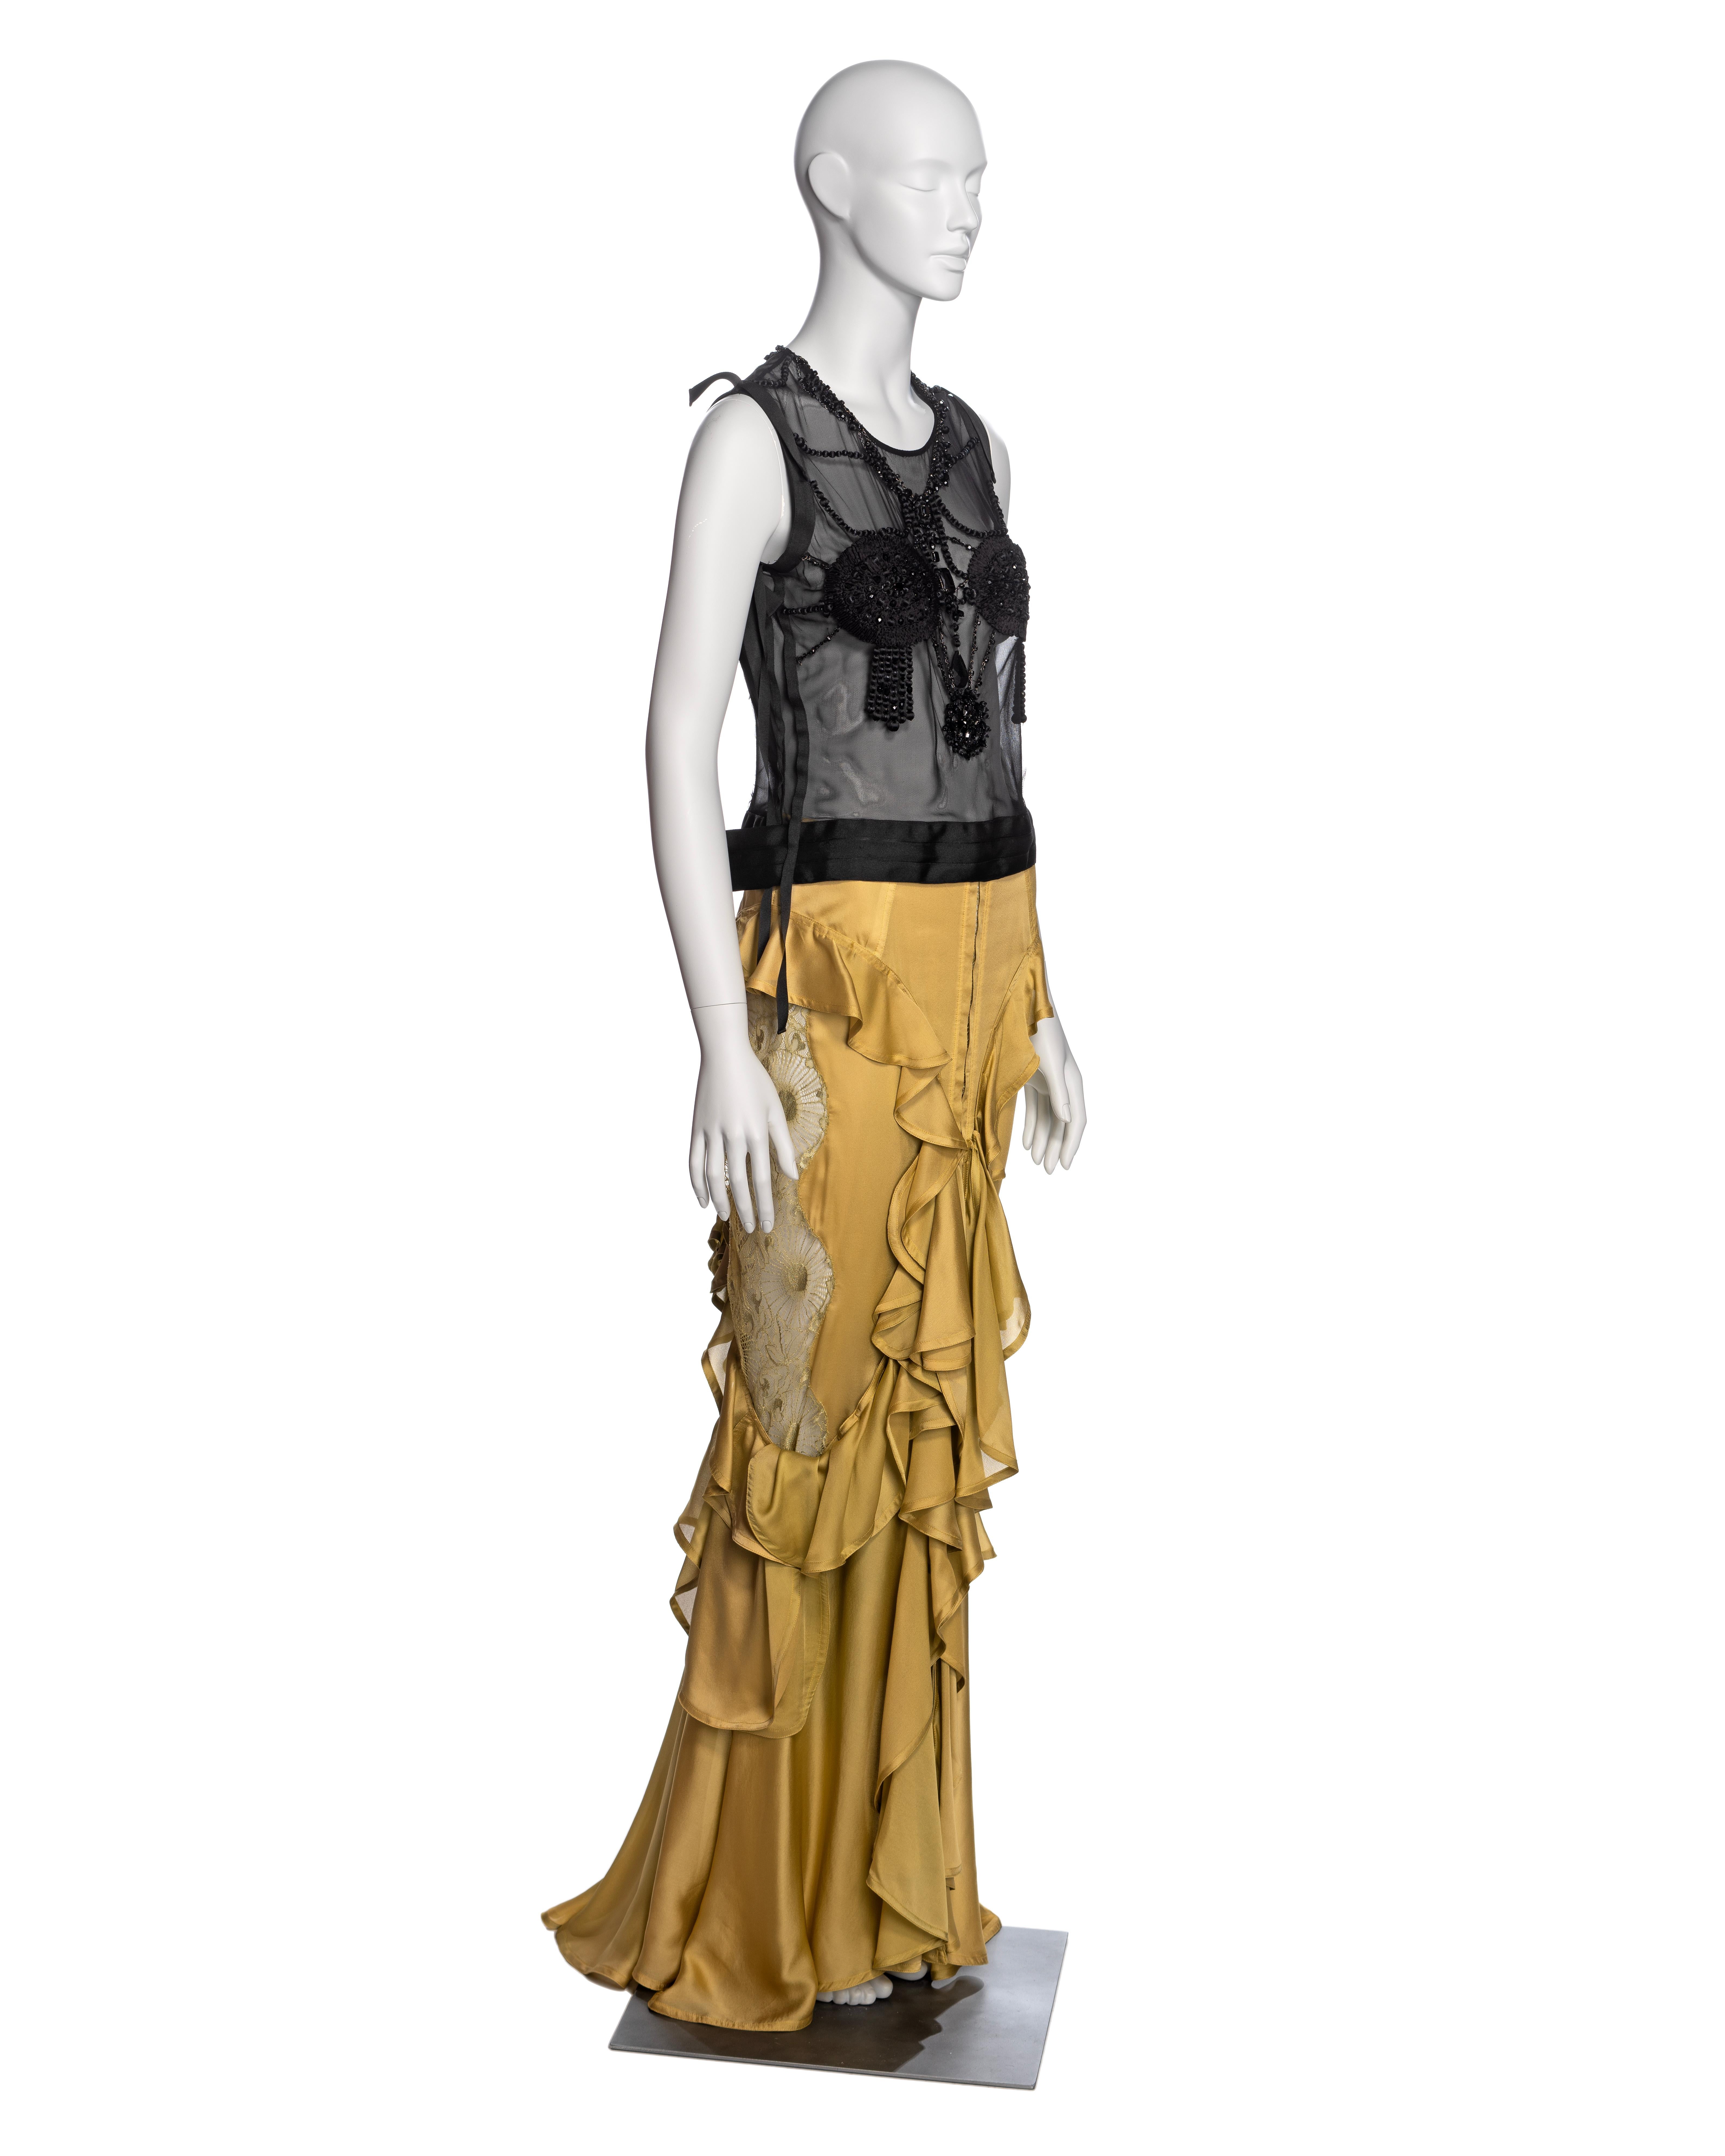 Yves Saint Laurent by Tom Ford Embellished Top and Silk Skirt Ensemble, FW 2003 For Sale 3